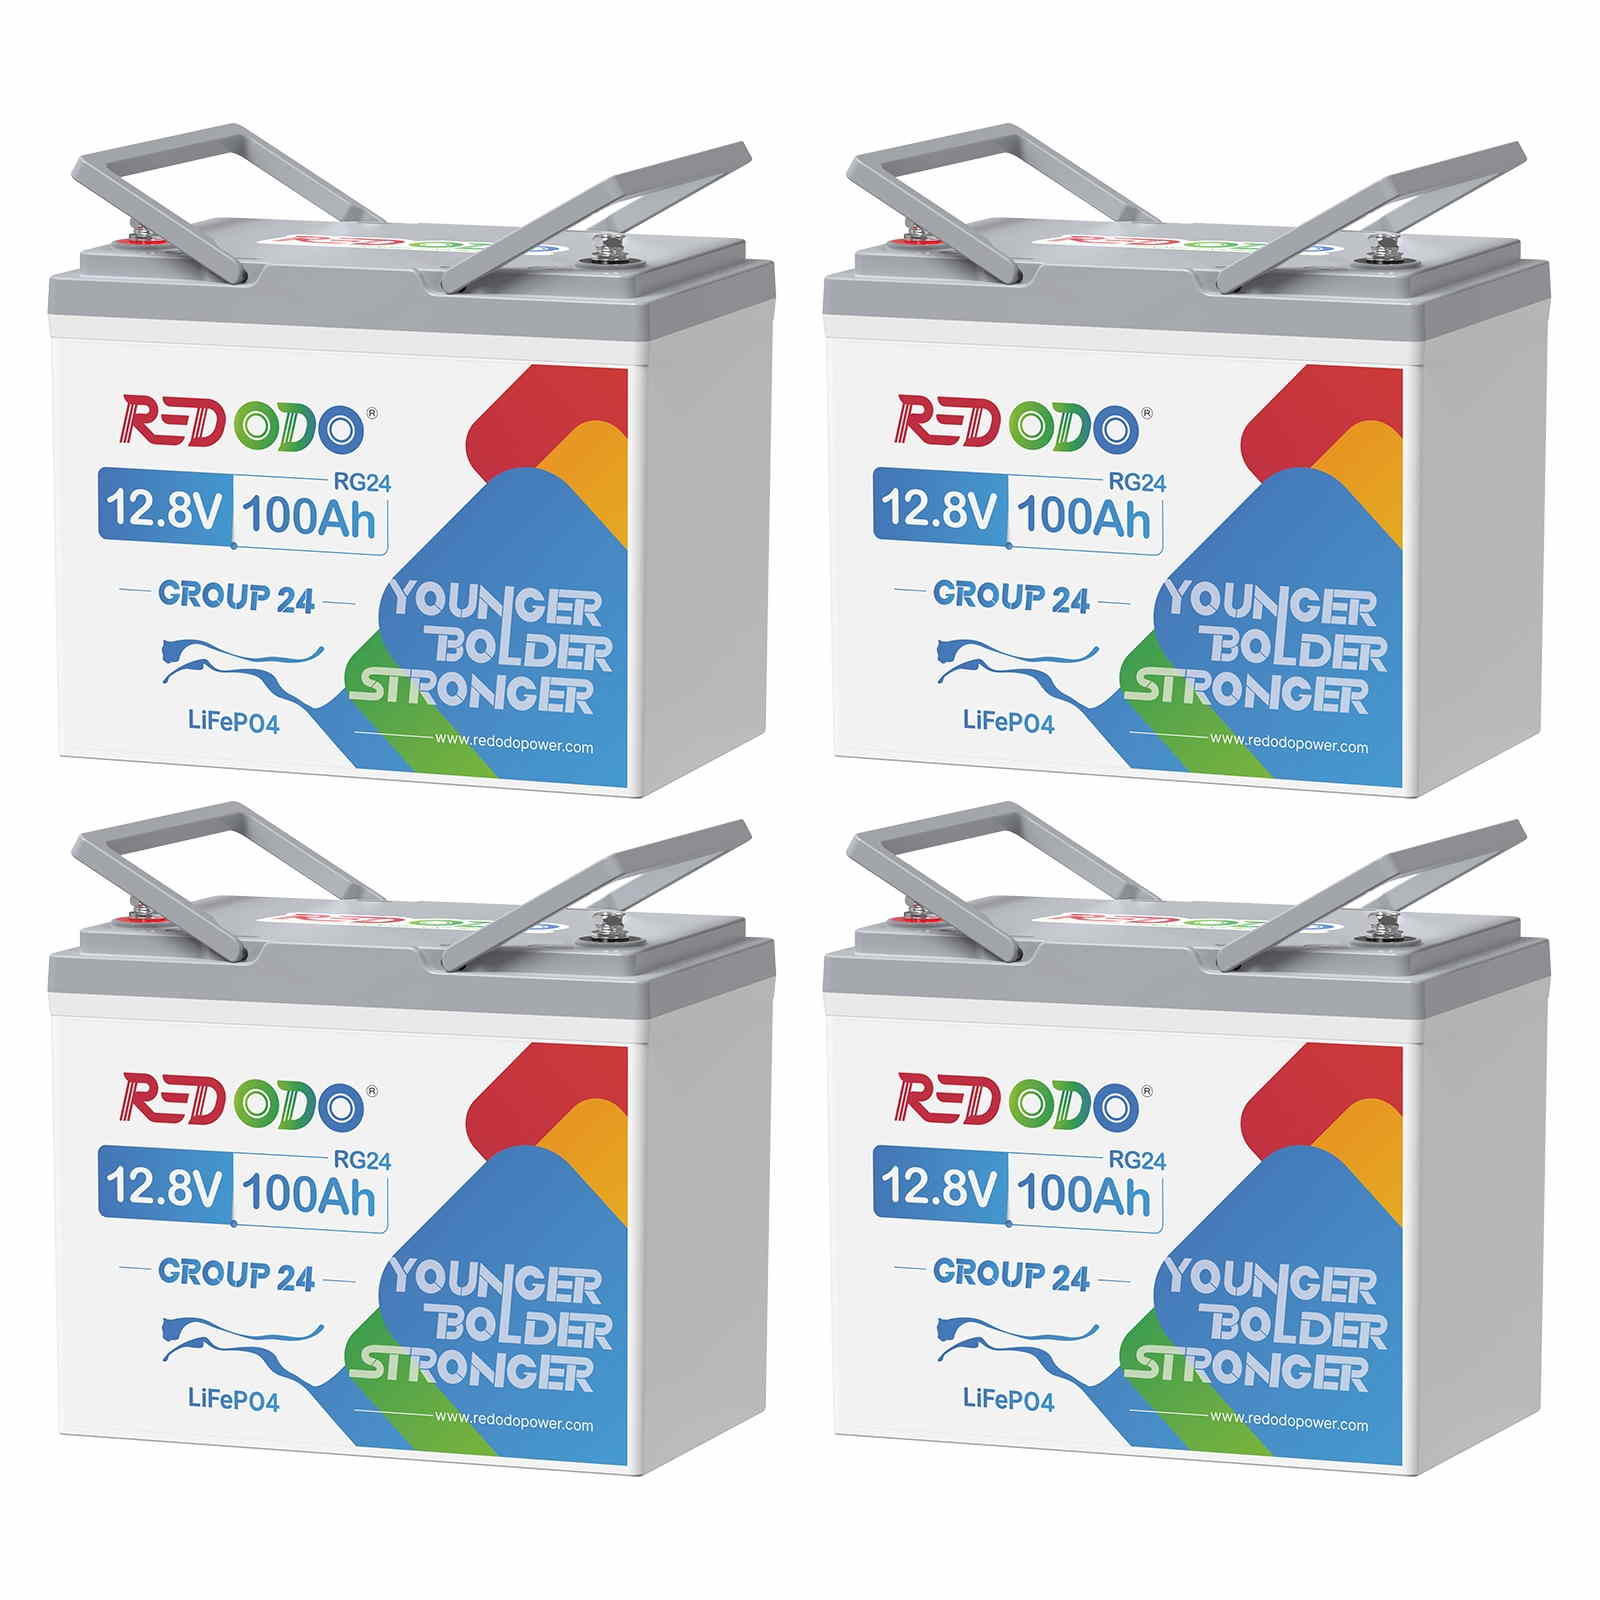 【Only $239】Redodo 12V 100Ah Group24 LiFePO4 Battery, Replacement for 12V Group24 lead acid battery Redodo Power